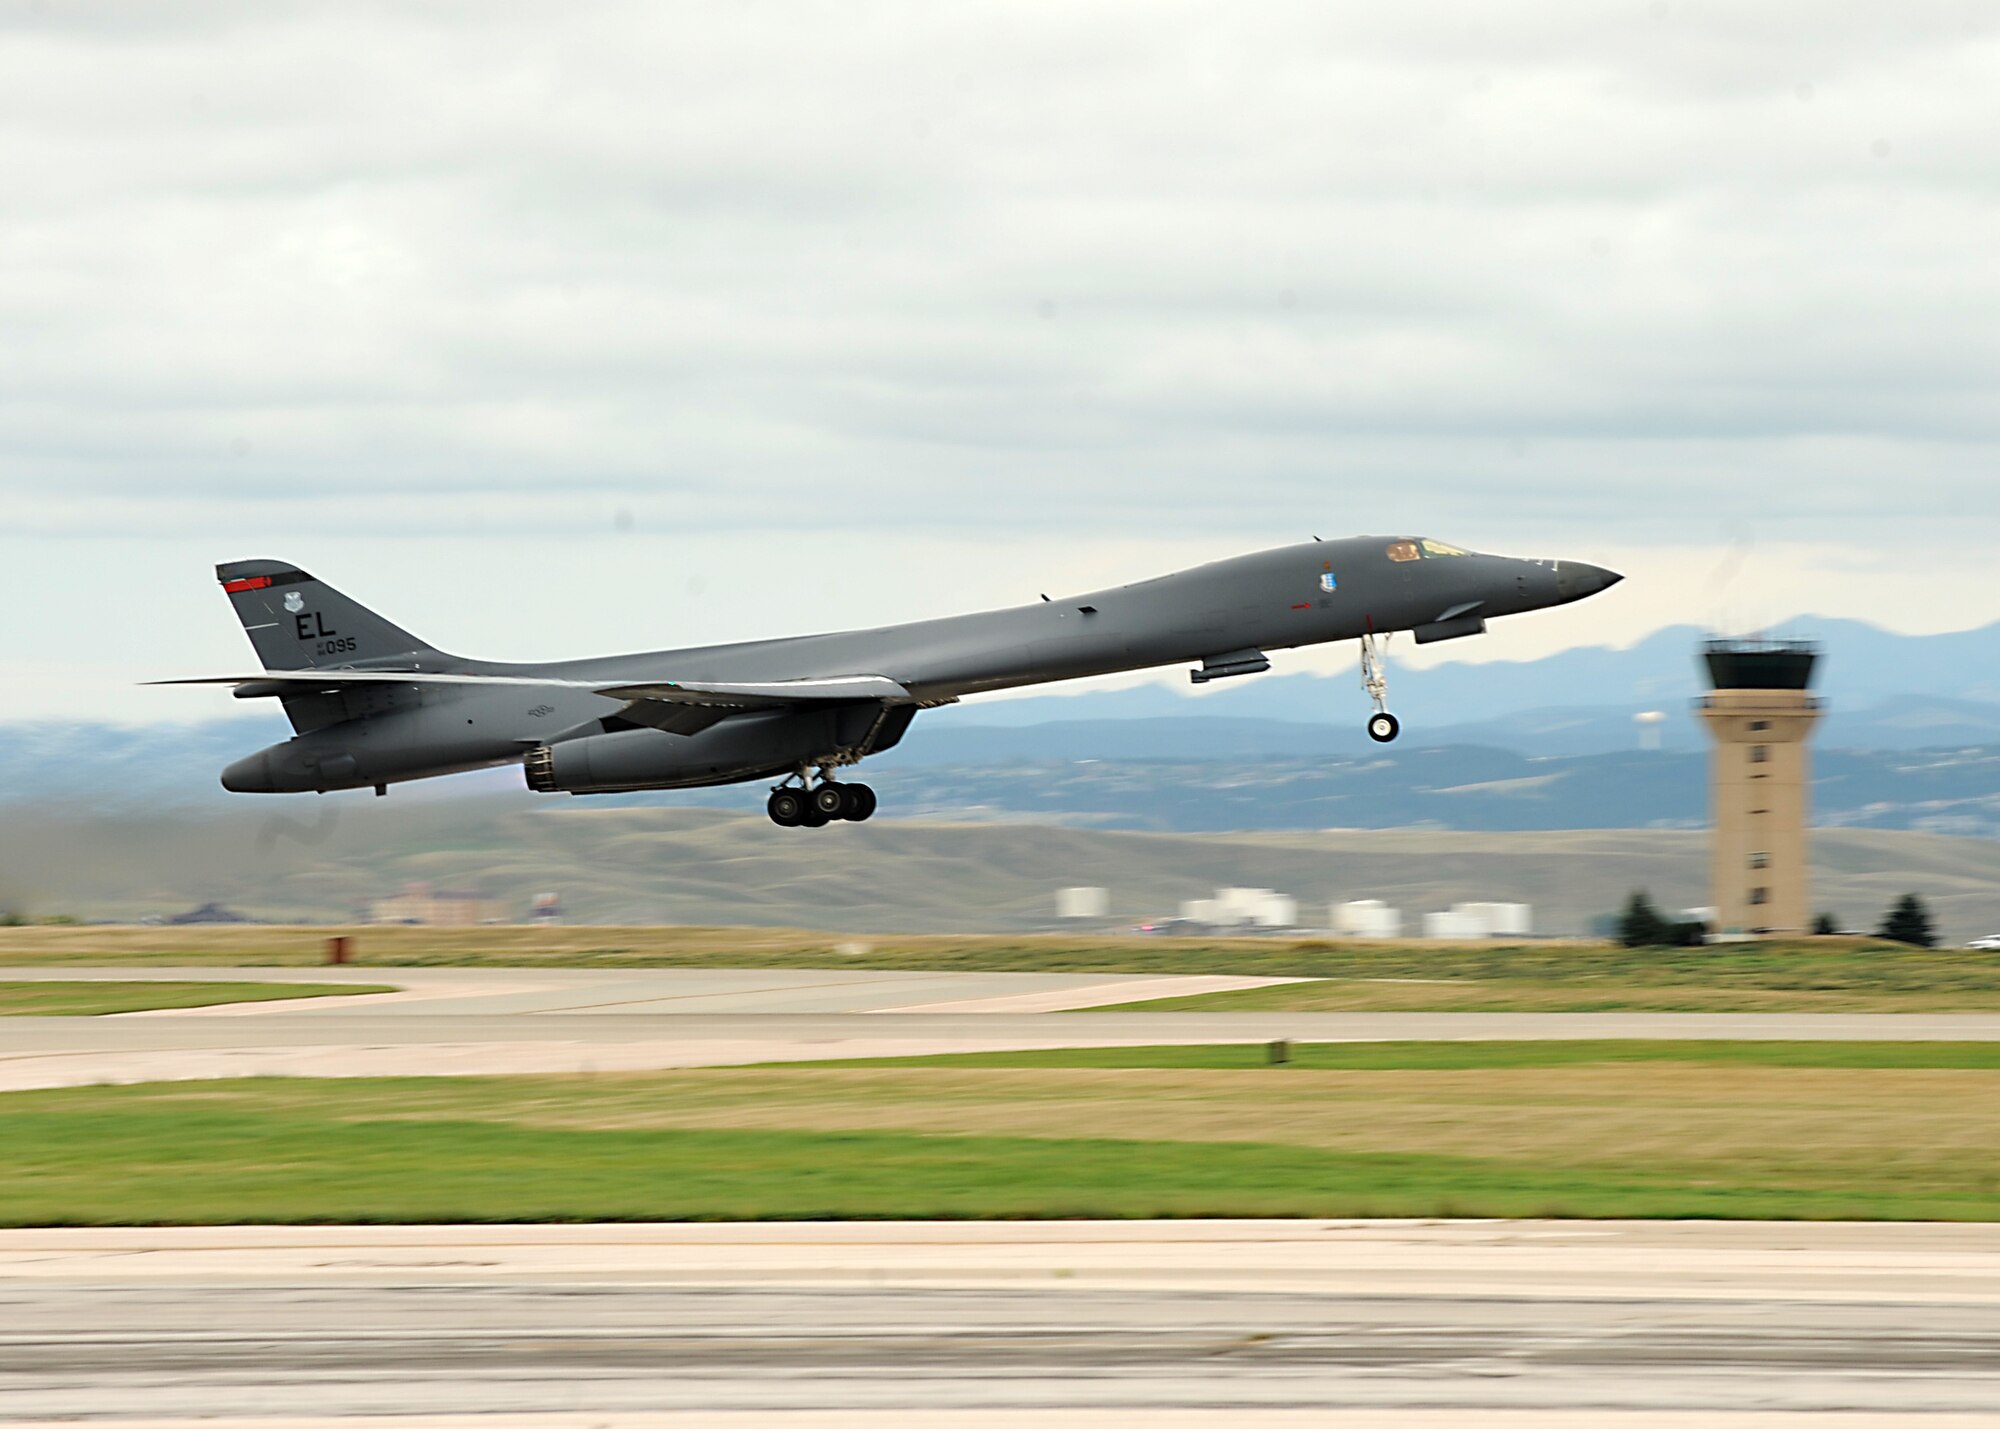 A B-1 bomber takes off from the runway while using full afterburners at Ellsworth Air Force Base, S.D., Sept. 12, 2016. The take-off was an opportunity to showcase the capabilities of the B-1 as part of a visit by international defense attachés from all over the world. (U.S. Air Force photo by Airman 1st Class Marshall L. Brown)